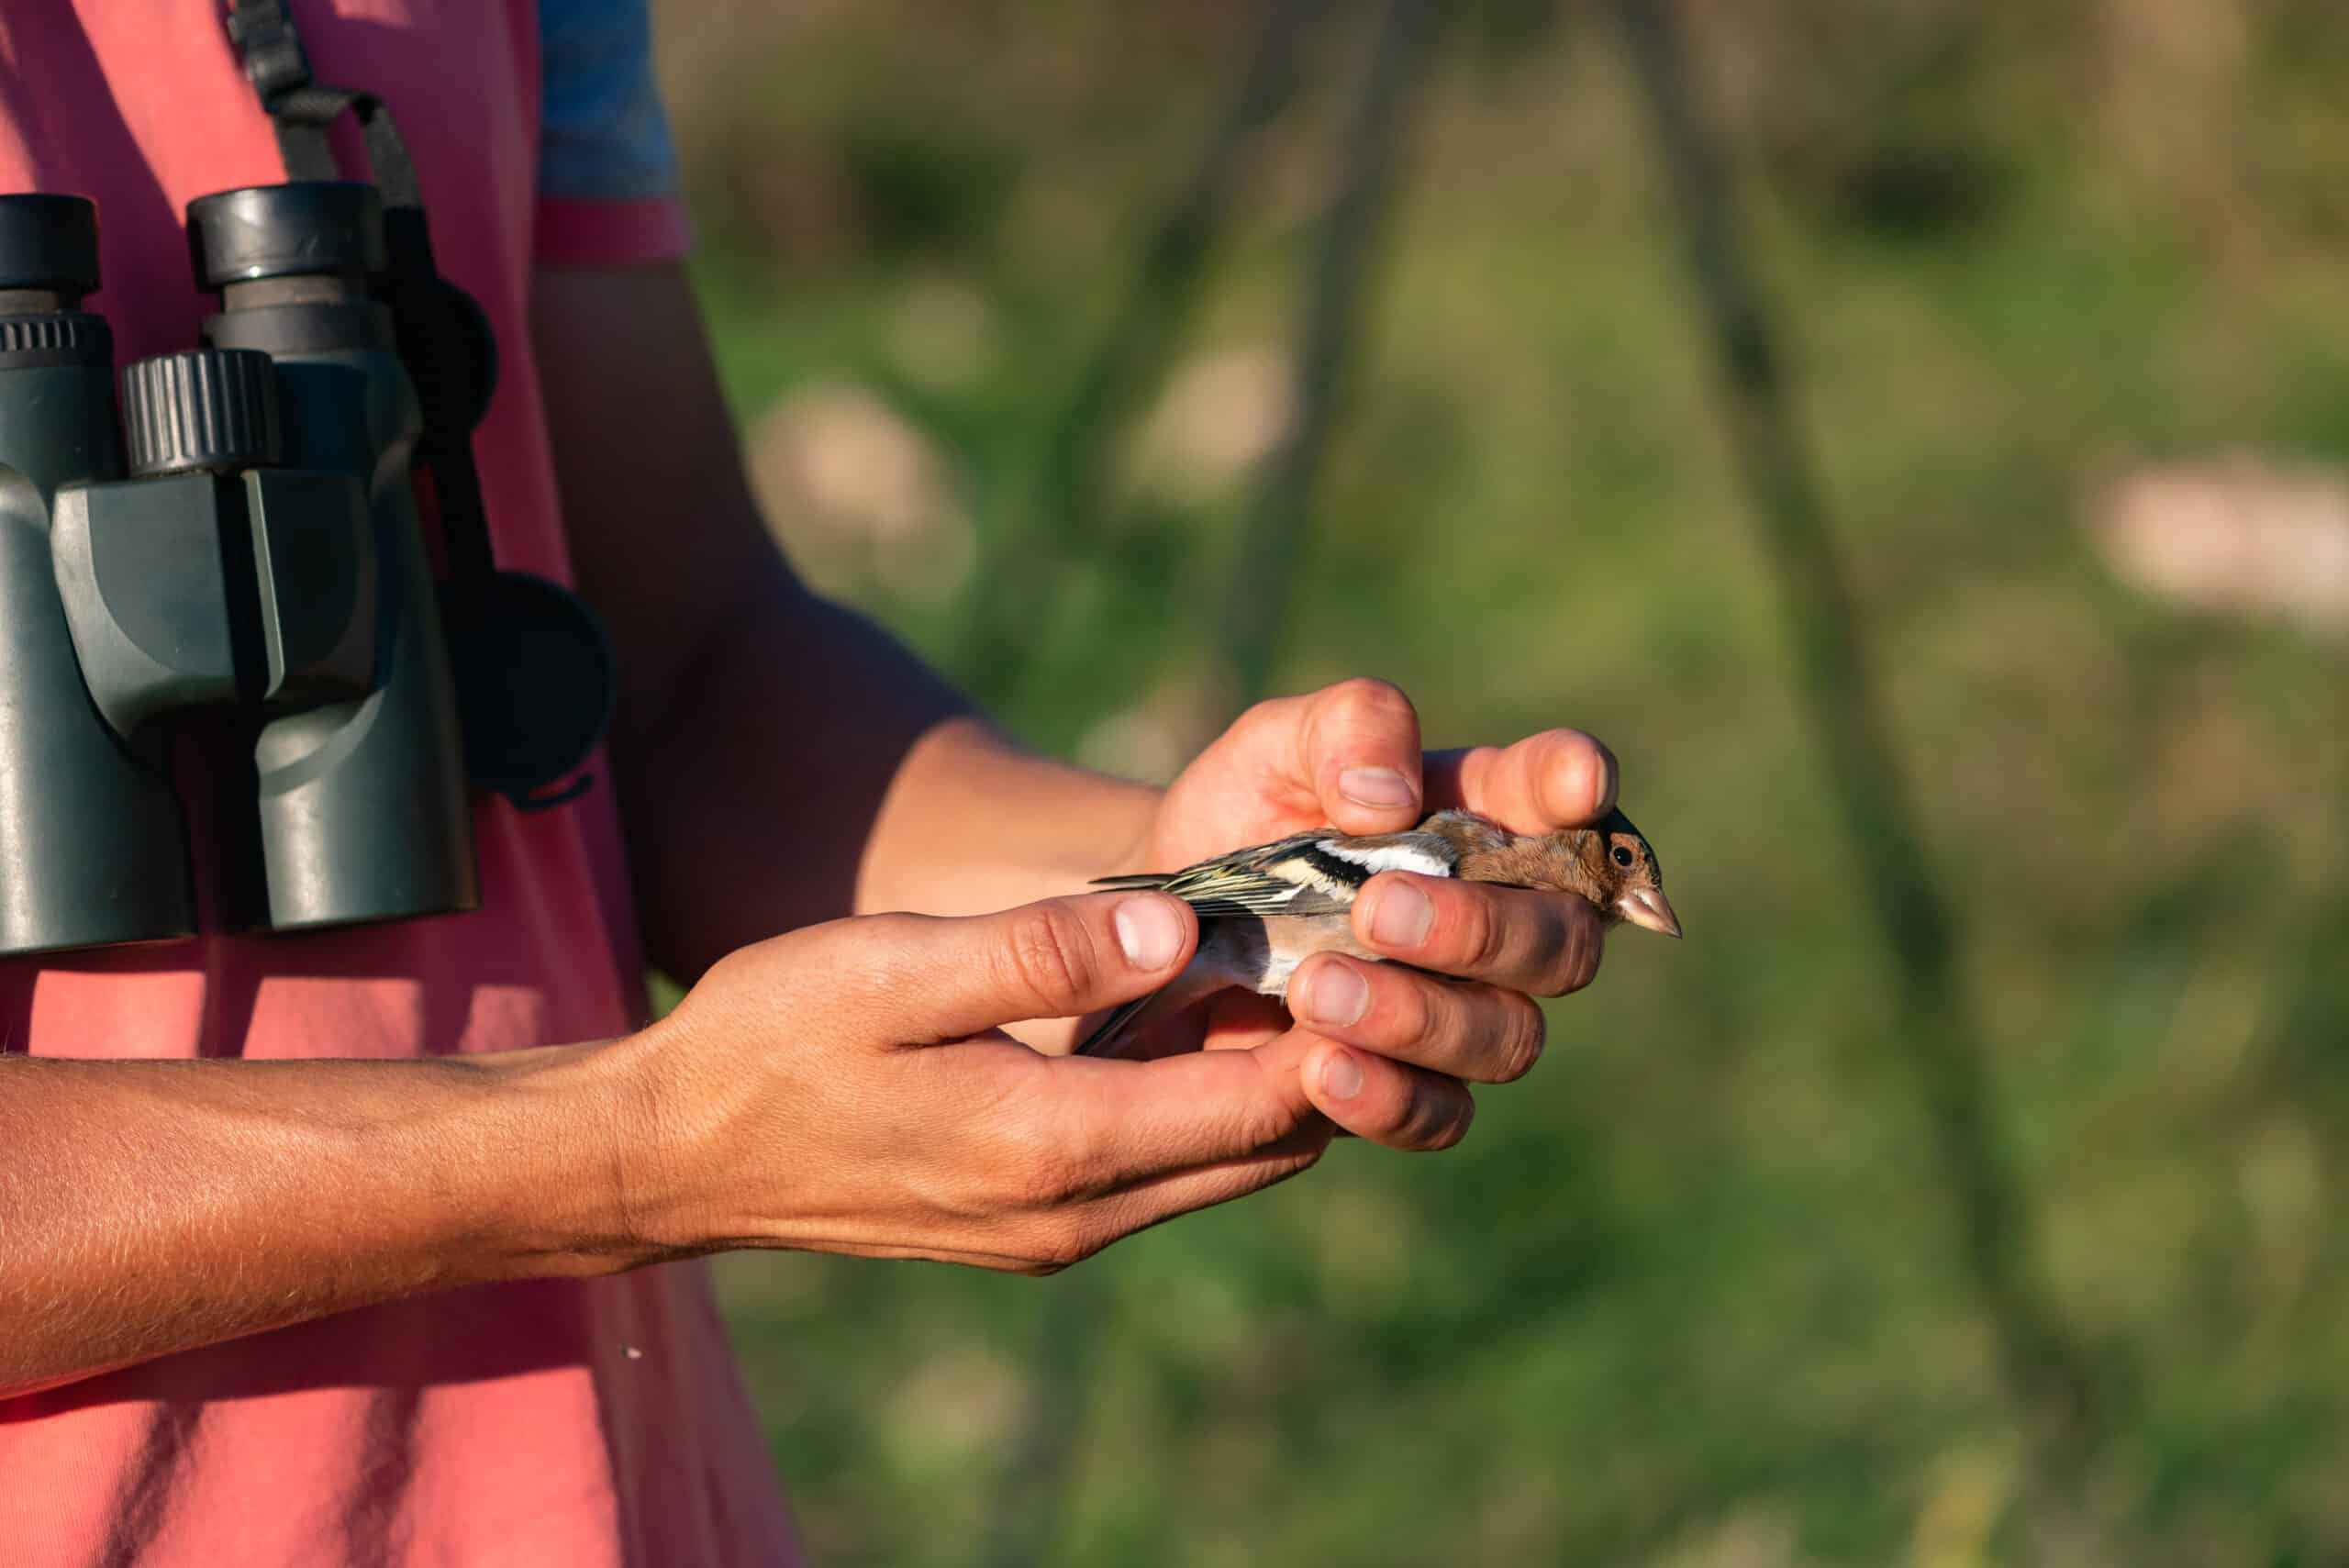 An ornithologist wearing binoculars holds a bird that is being banded